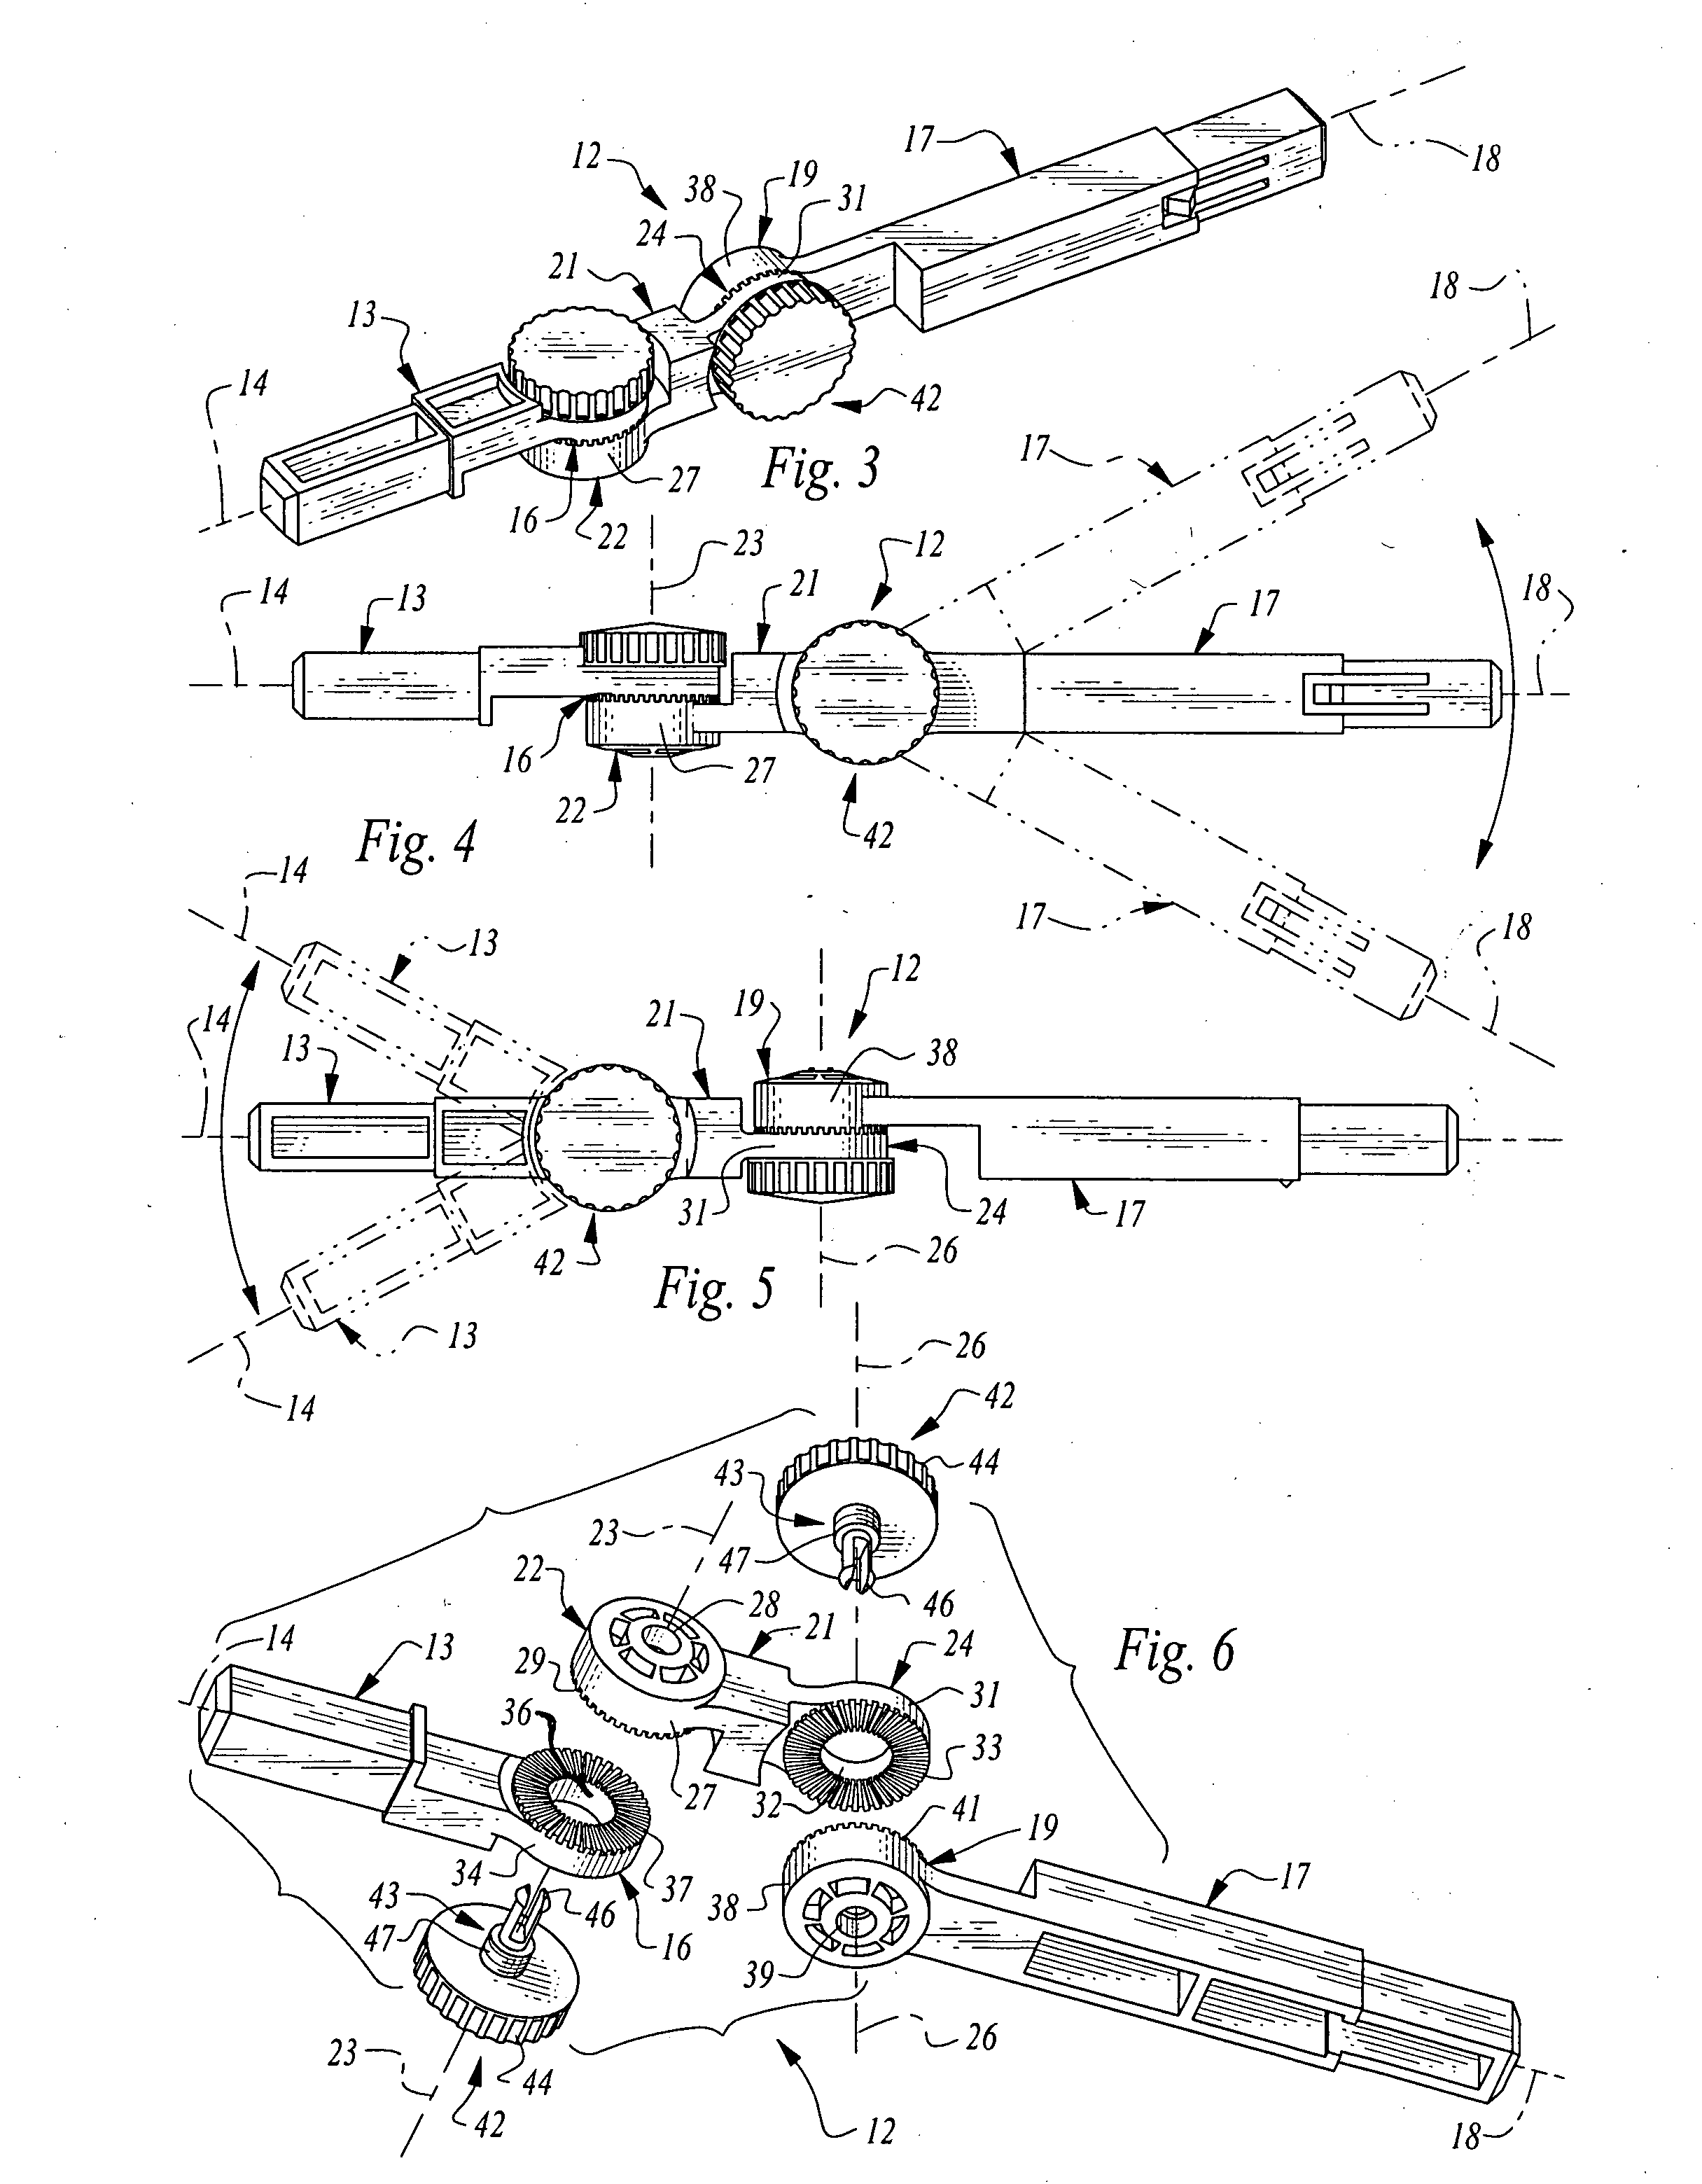 Medical splinting apparatus and methods for using same